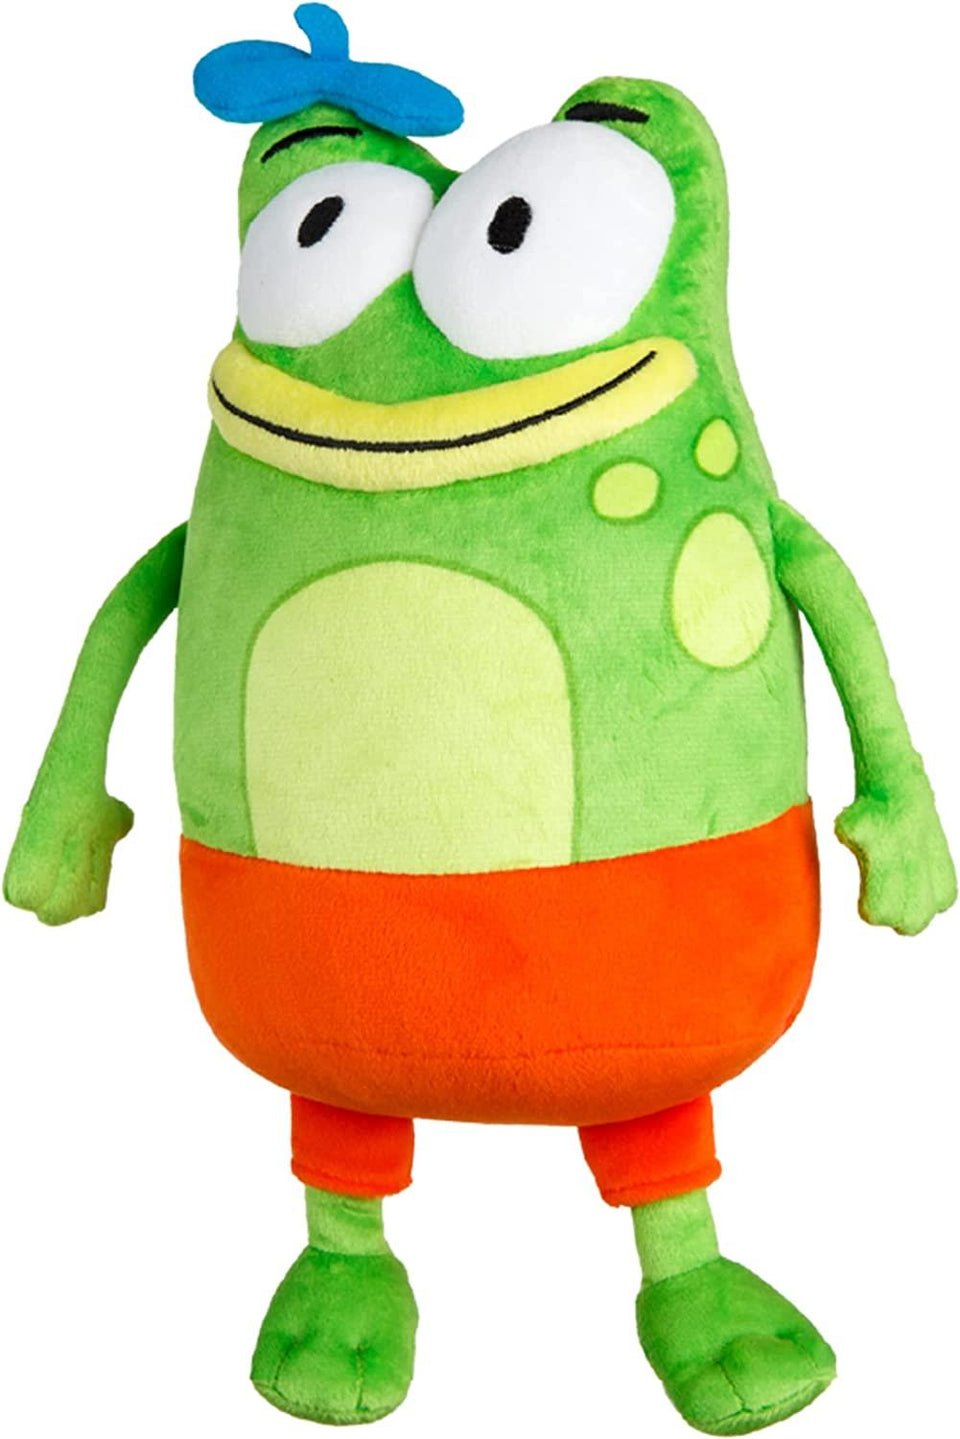 Lets Go Luna! Andy Hopper The Green Frog Plush Doll PBS Kids Cartoon Animated Figure Mighty Mojo